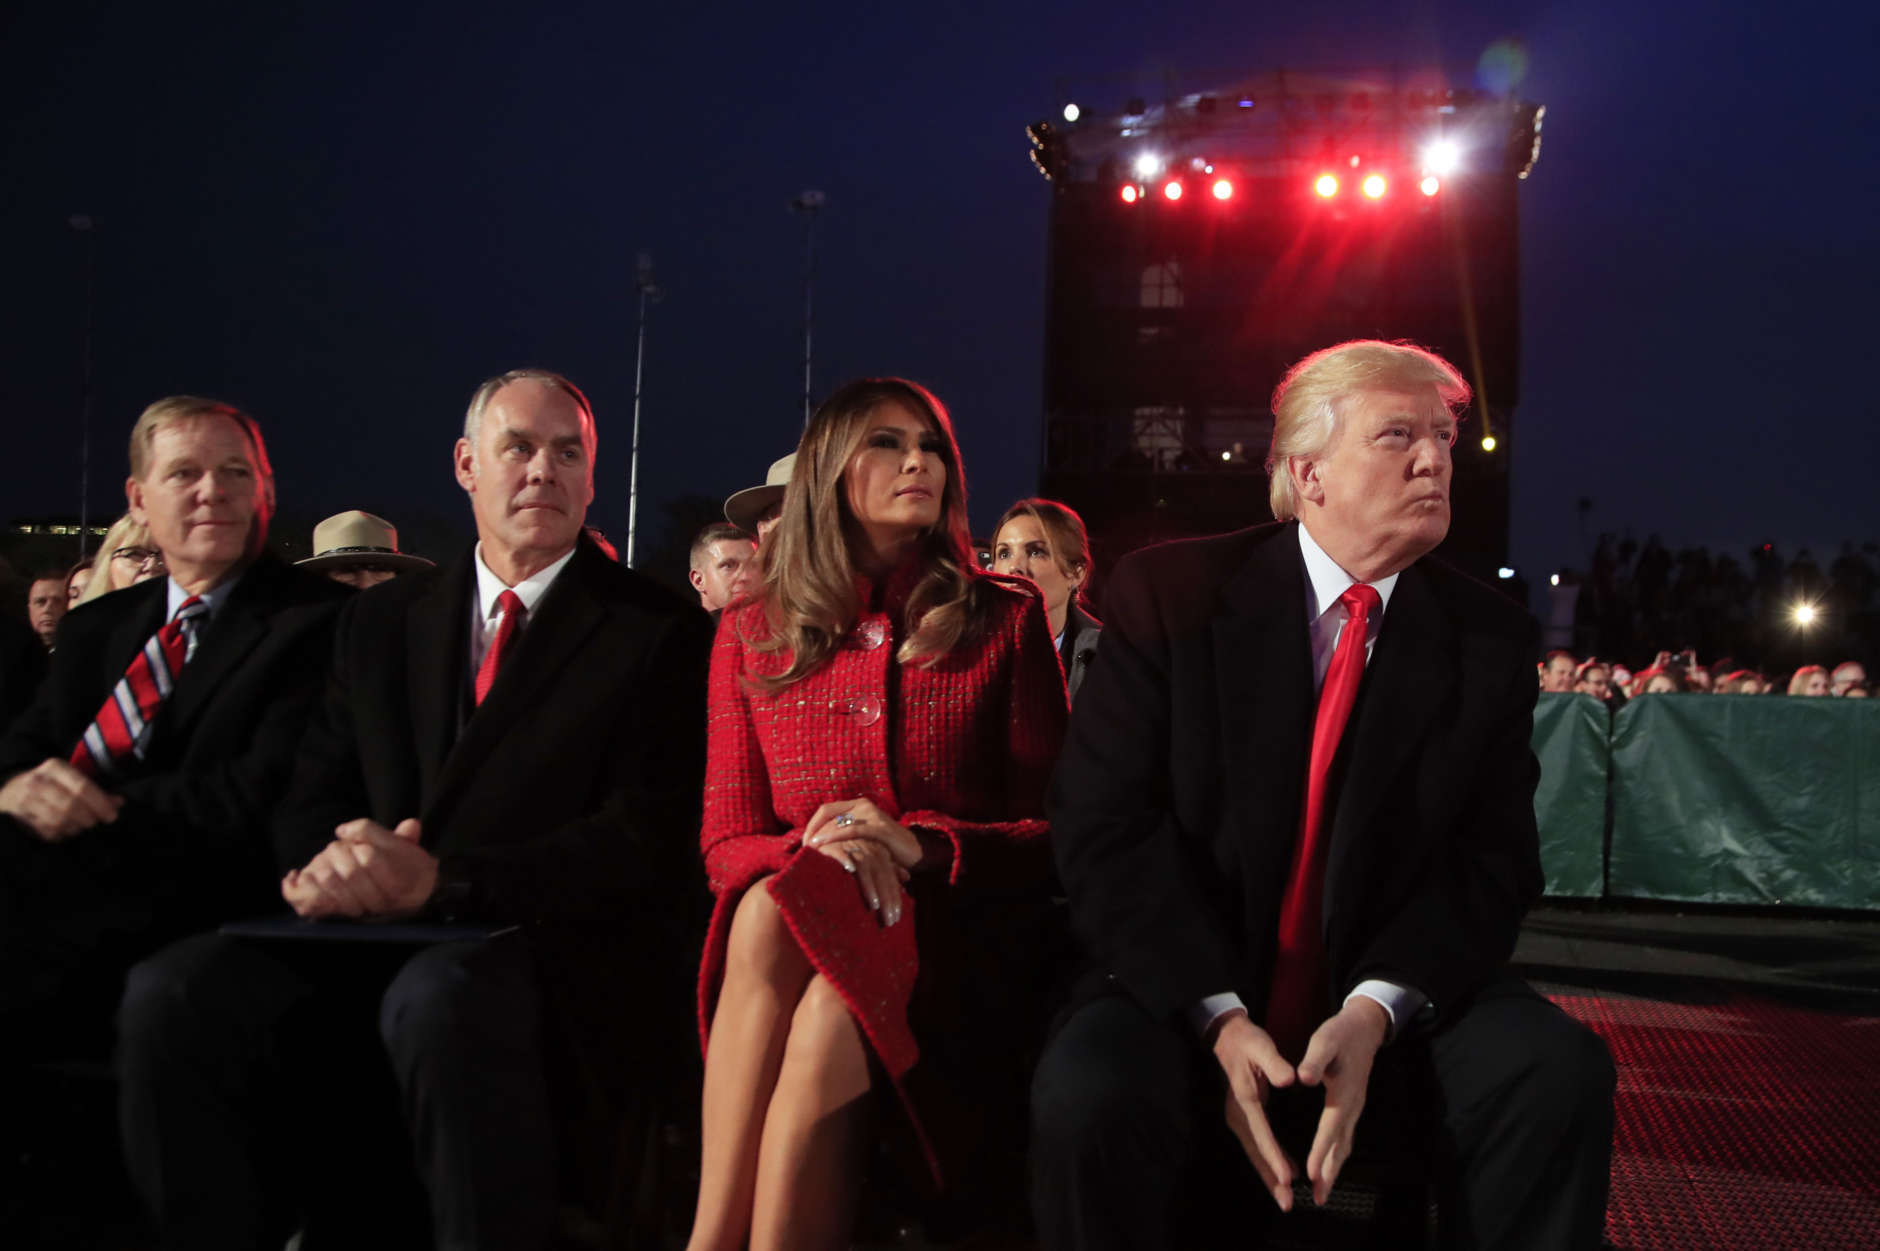 President Donald Trump and first lady Melania Trump, watch performances during the National Christmas Tree lighting ceremony at the Ellipse near the White House in Washington, Thursday, Nov. 30, 2017, with Interior Secretary Ryan Zinke, second from left. (AP Photo/Manuel Balce Ceneta)